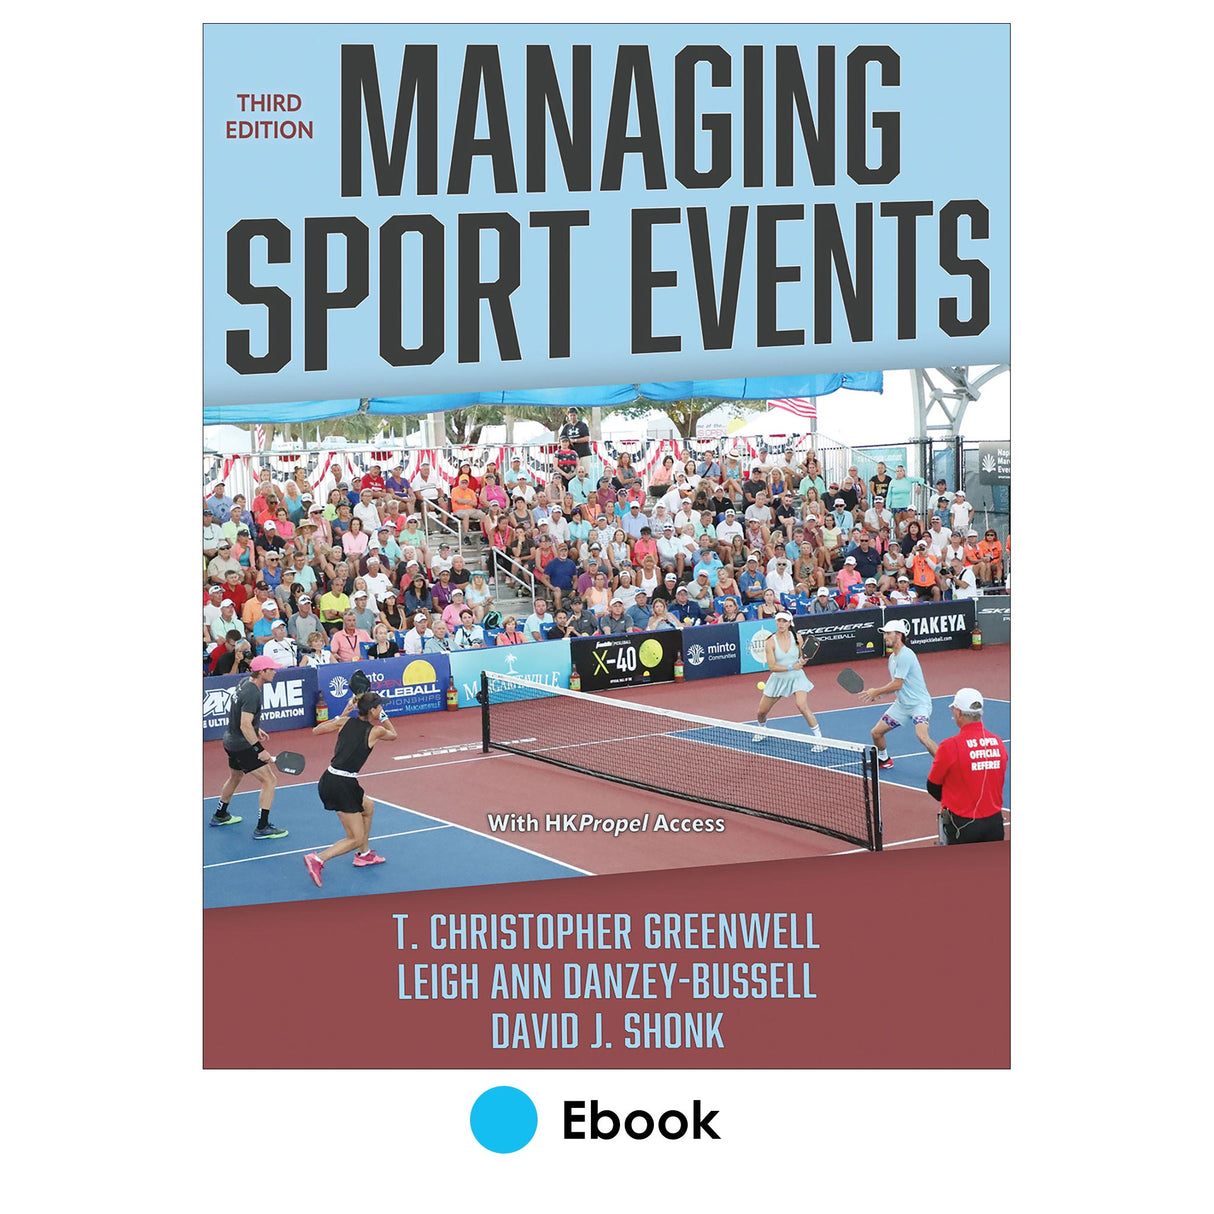 Managing Sport Events 3rd Edition Ebook With HKPropel Access